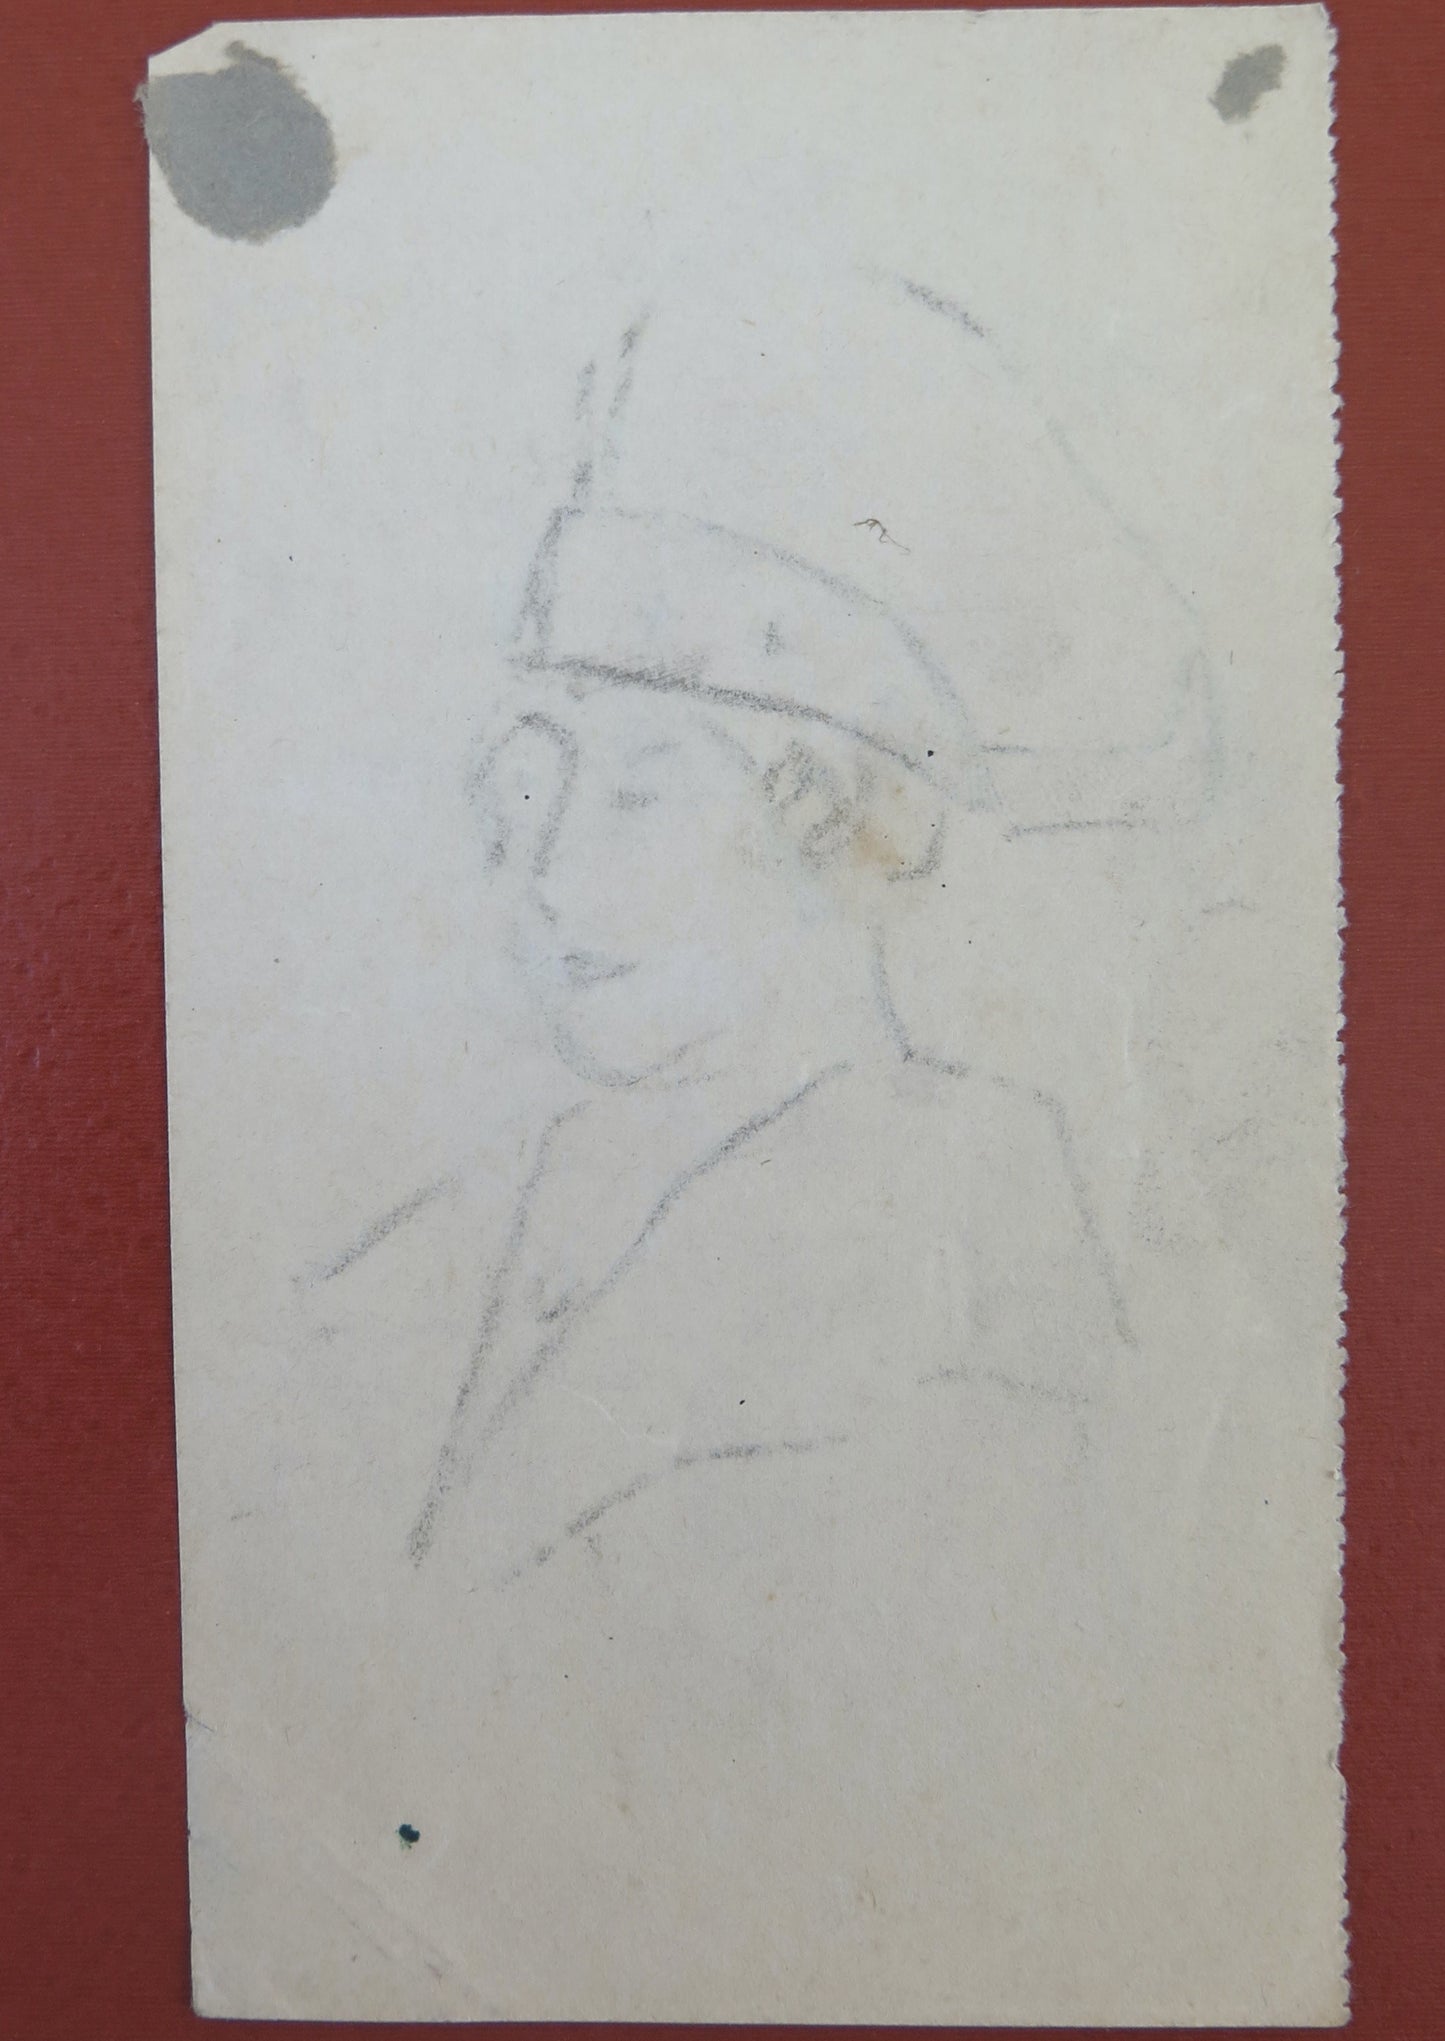 ANTIQUE DRAWING SKETCH PORTRAIT OF AN ELEGANT LADY FROM THE EARLY 1900s BM53.5F